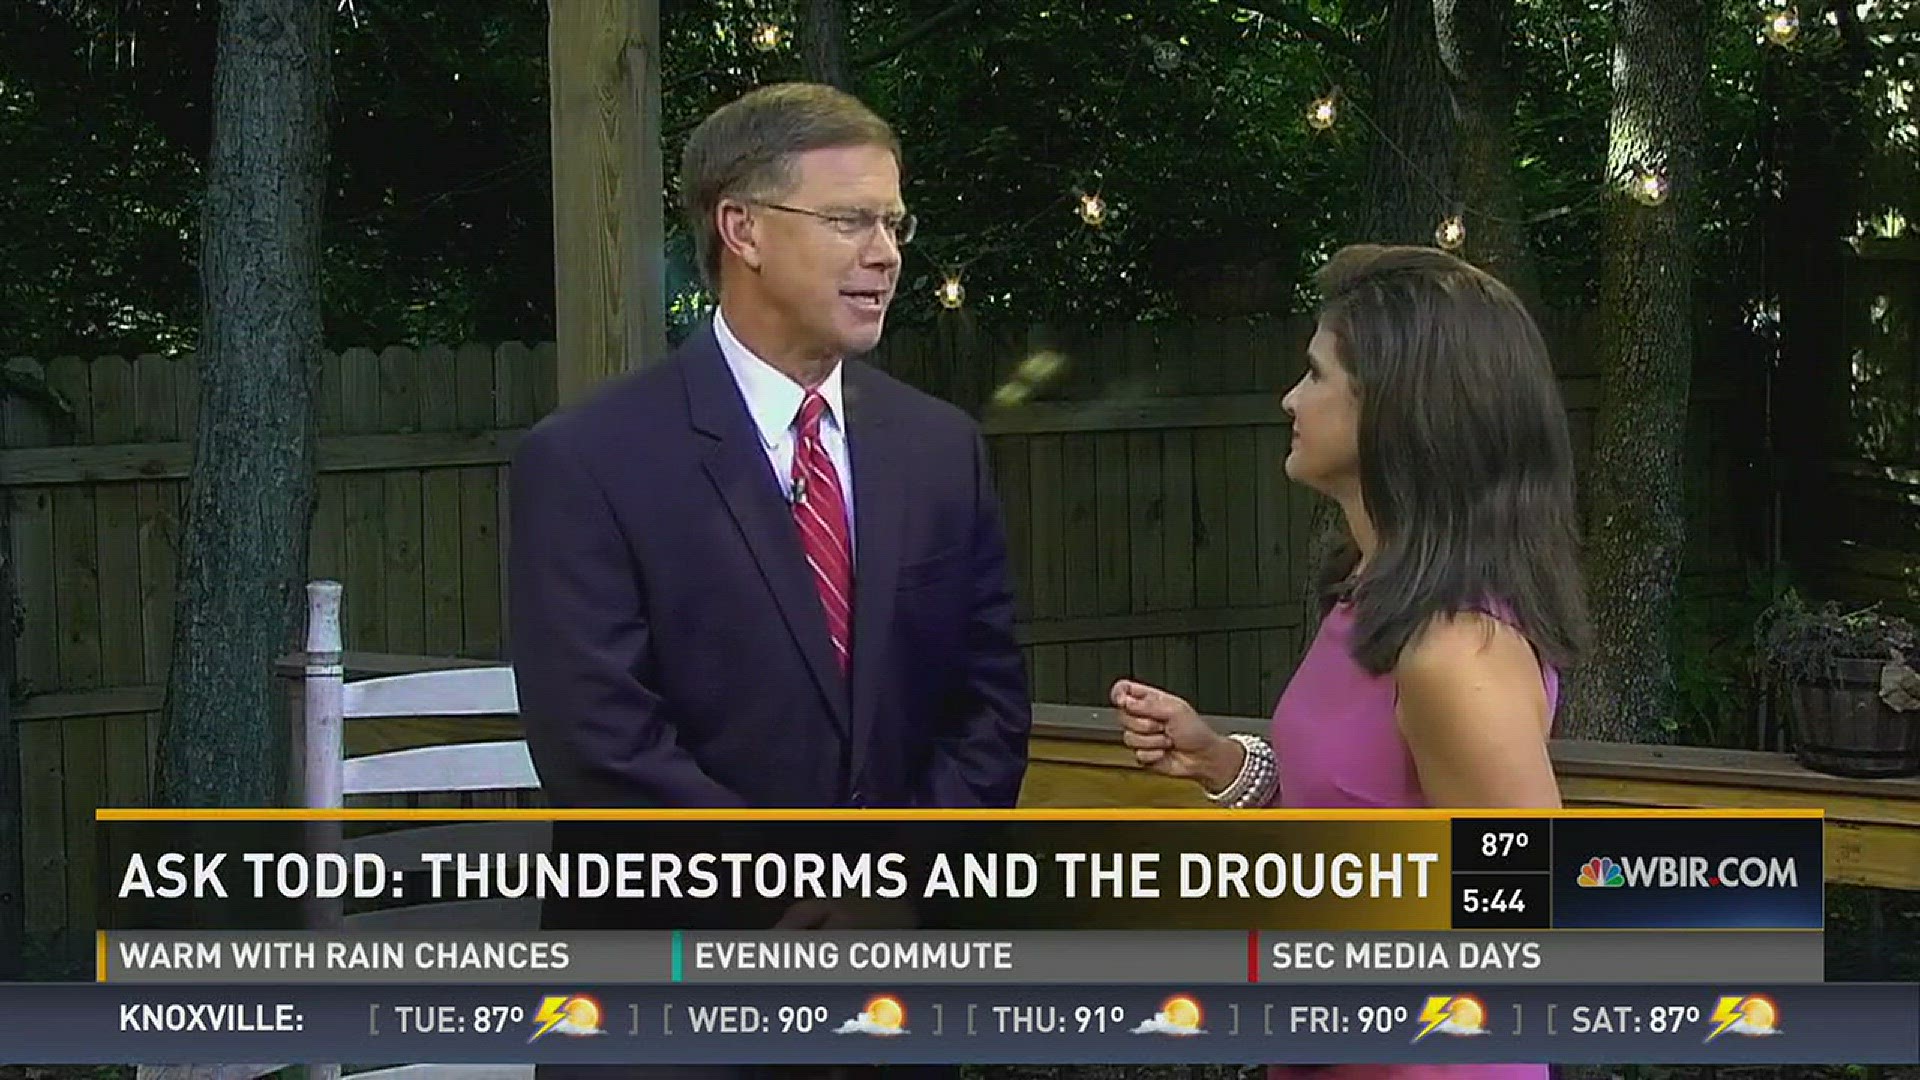 WBIR Chief Meteorologist Todd Howell discusses last week's heavy storms and whether the large amounts of rain put an end to the drought in East Tennessee.